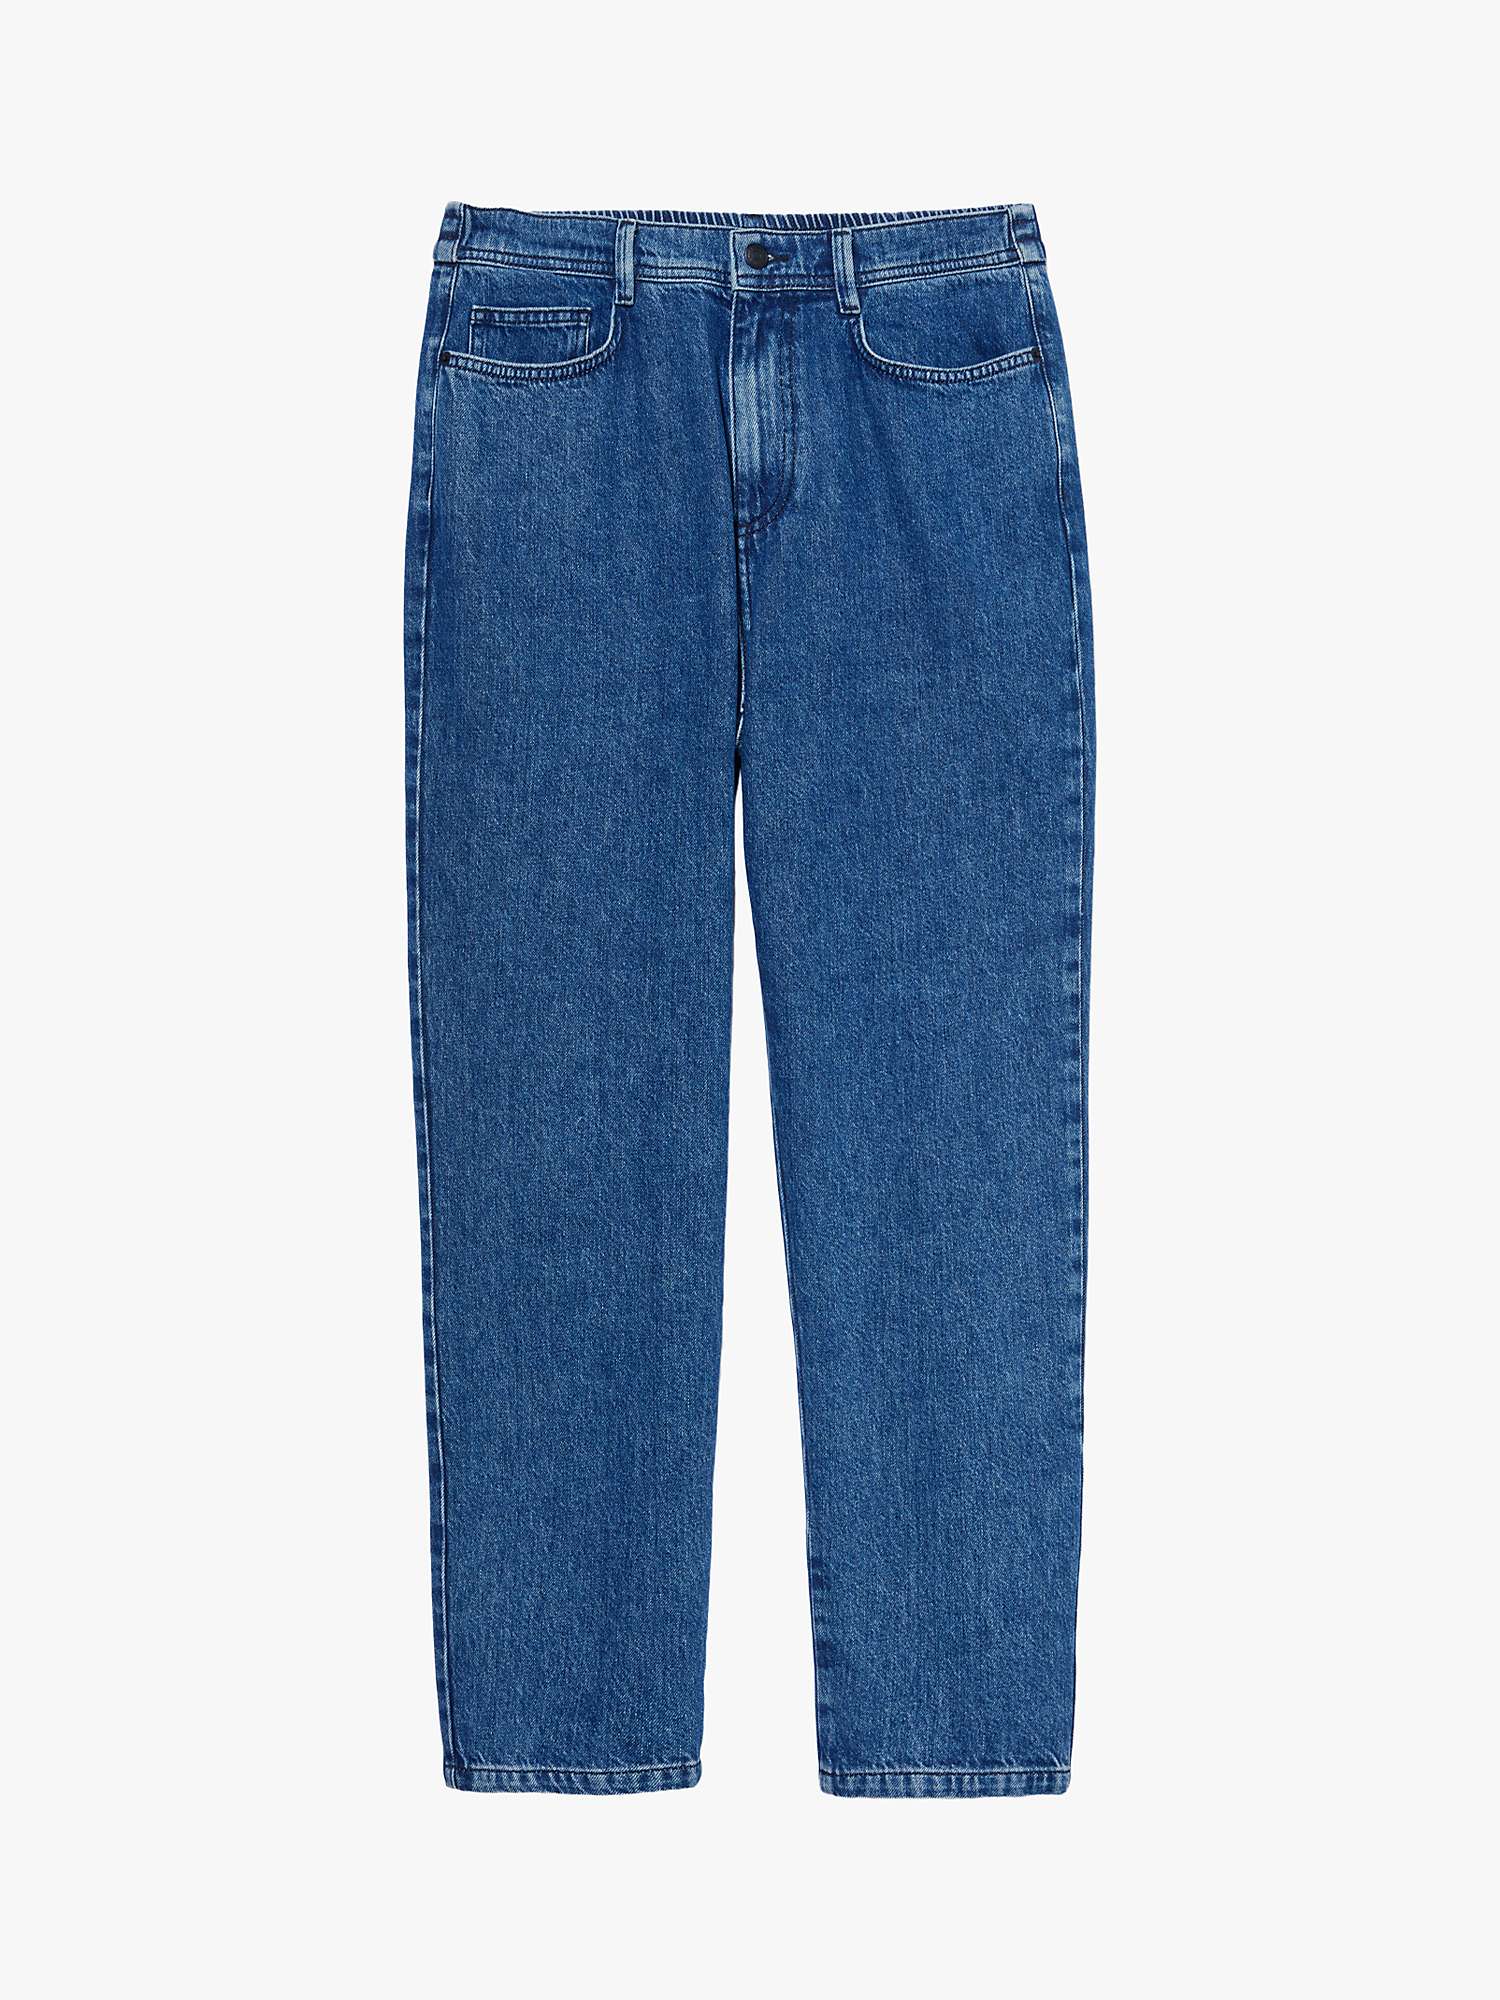 Buy SISLEY Relaxed Fit Jeans, Blue Online at johnlewis.com